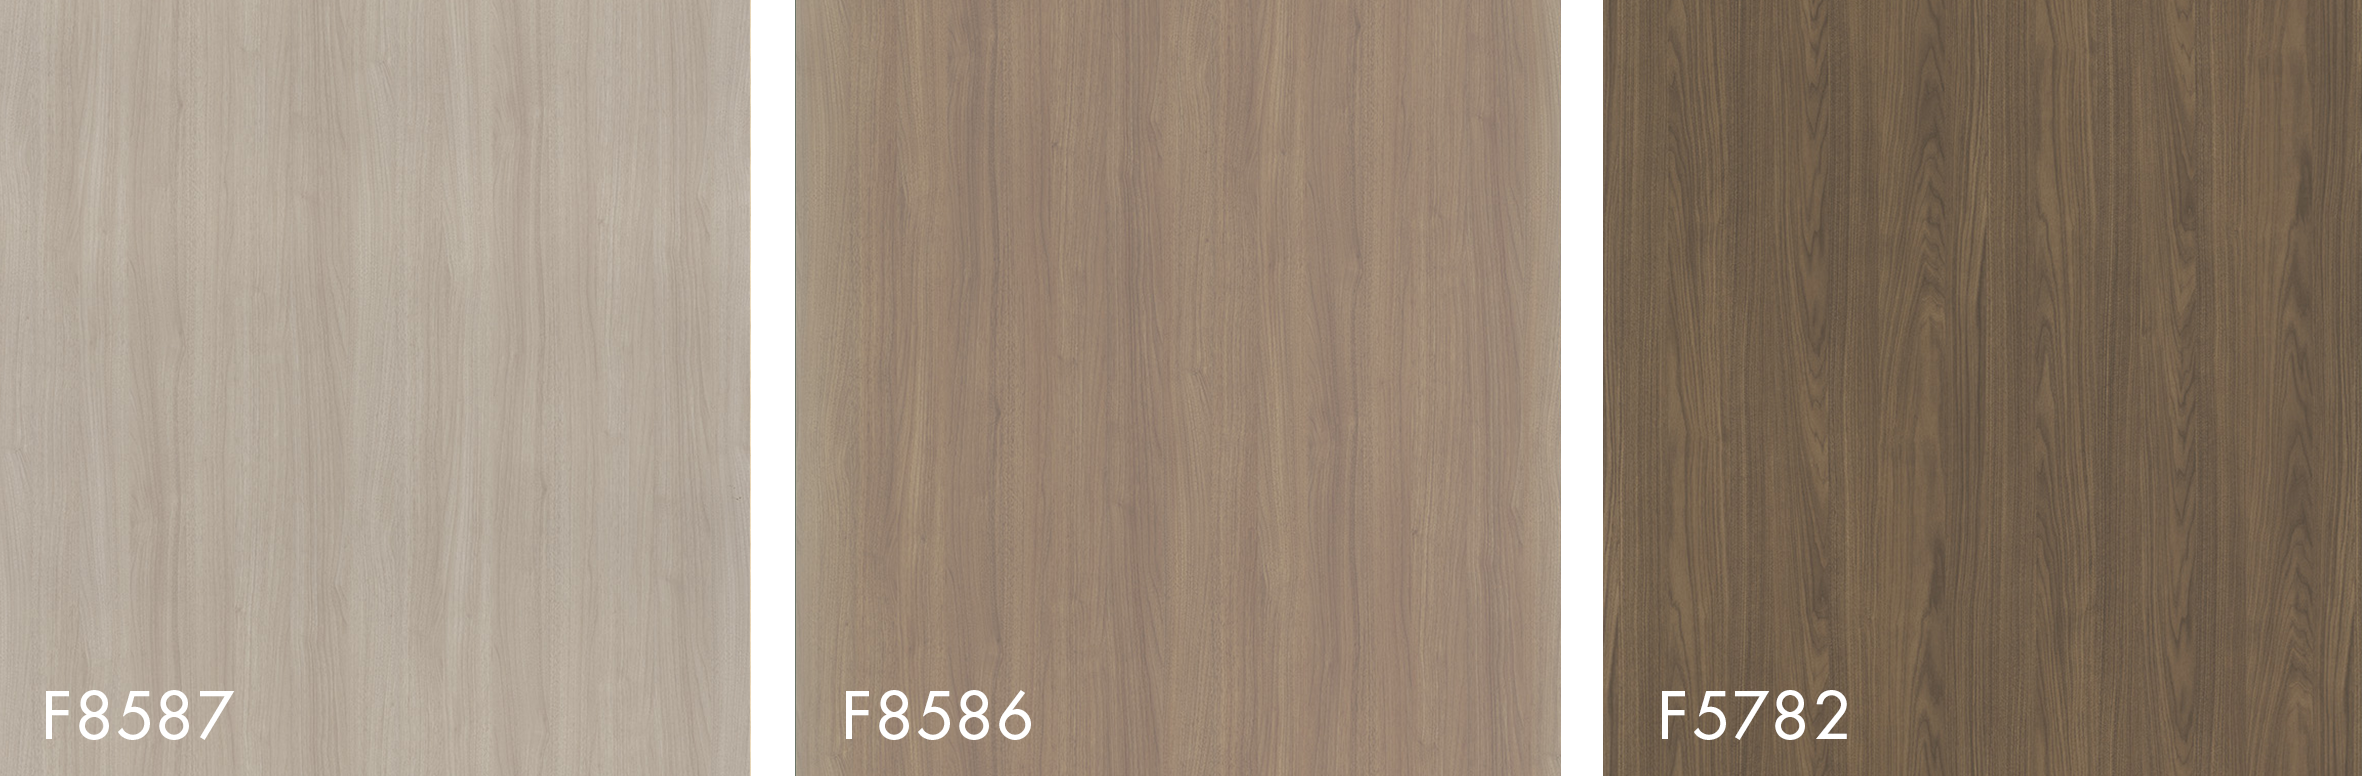 Formica Woods